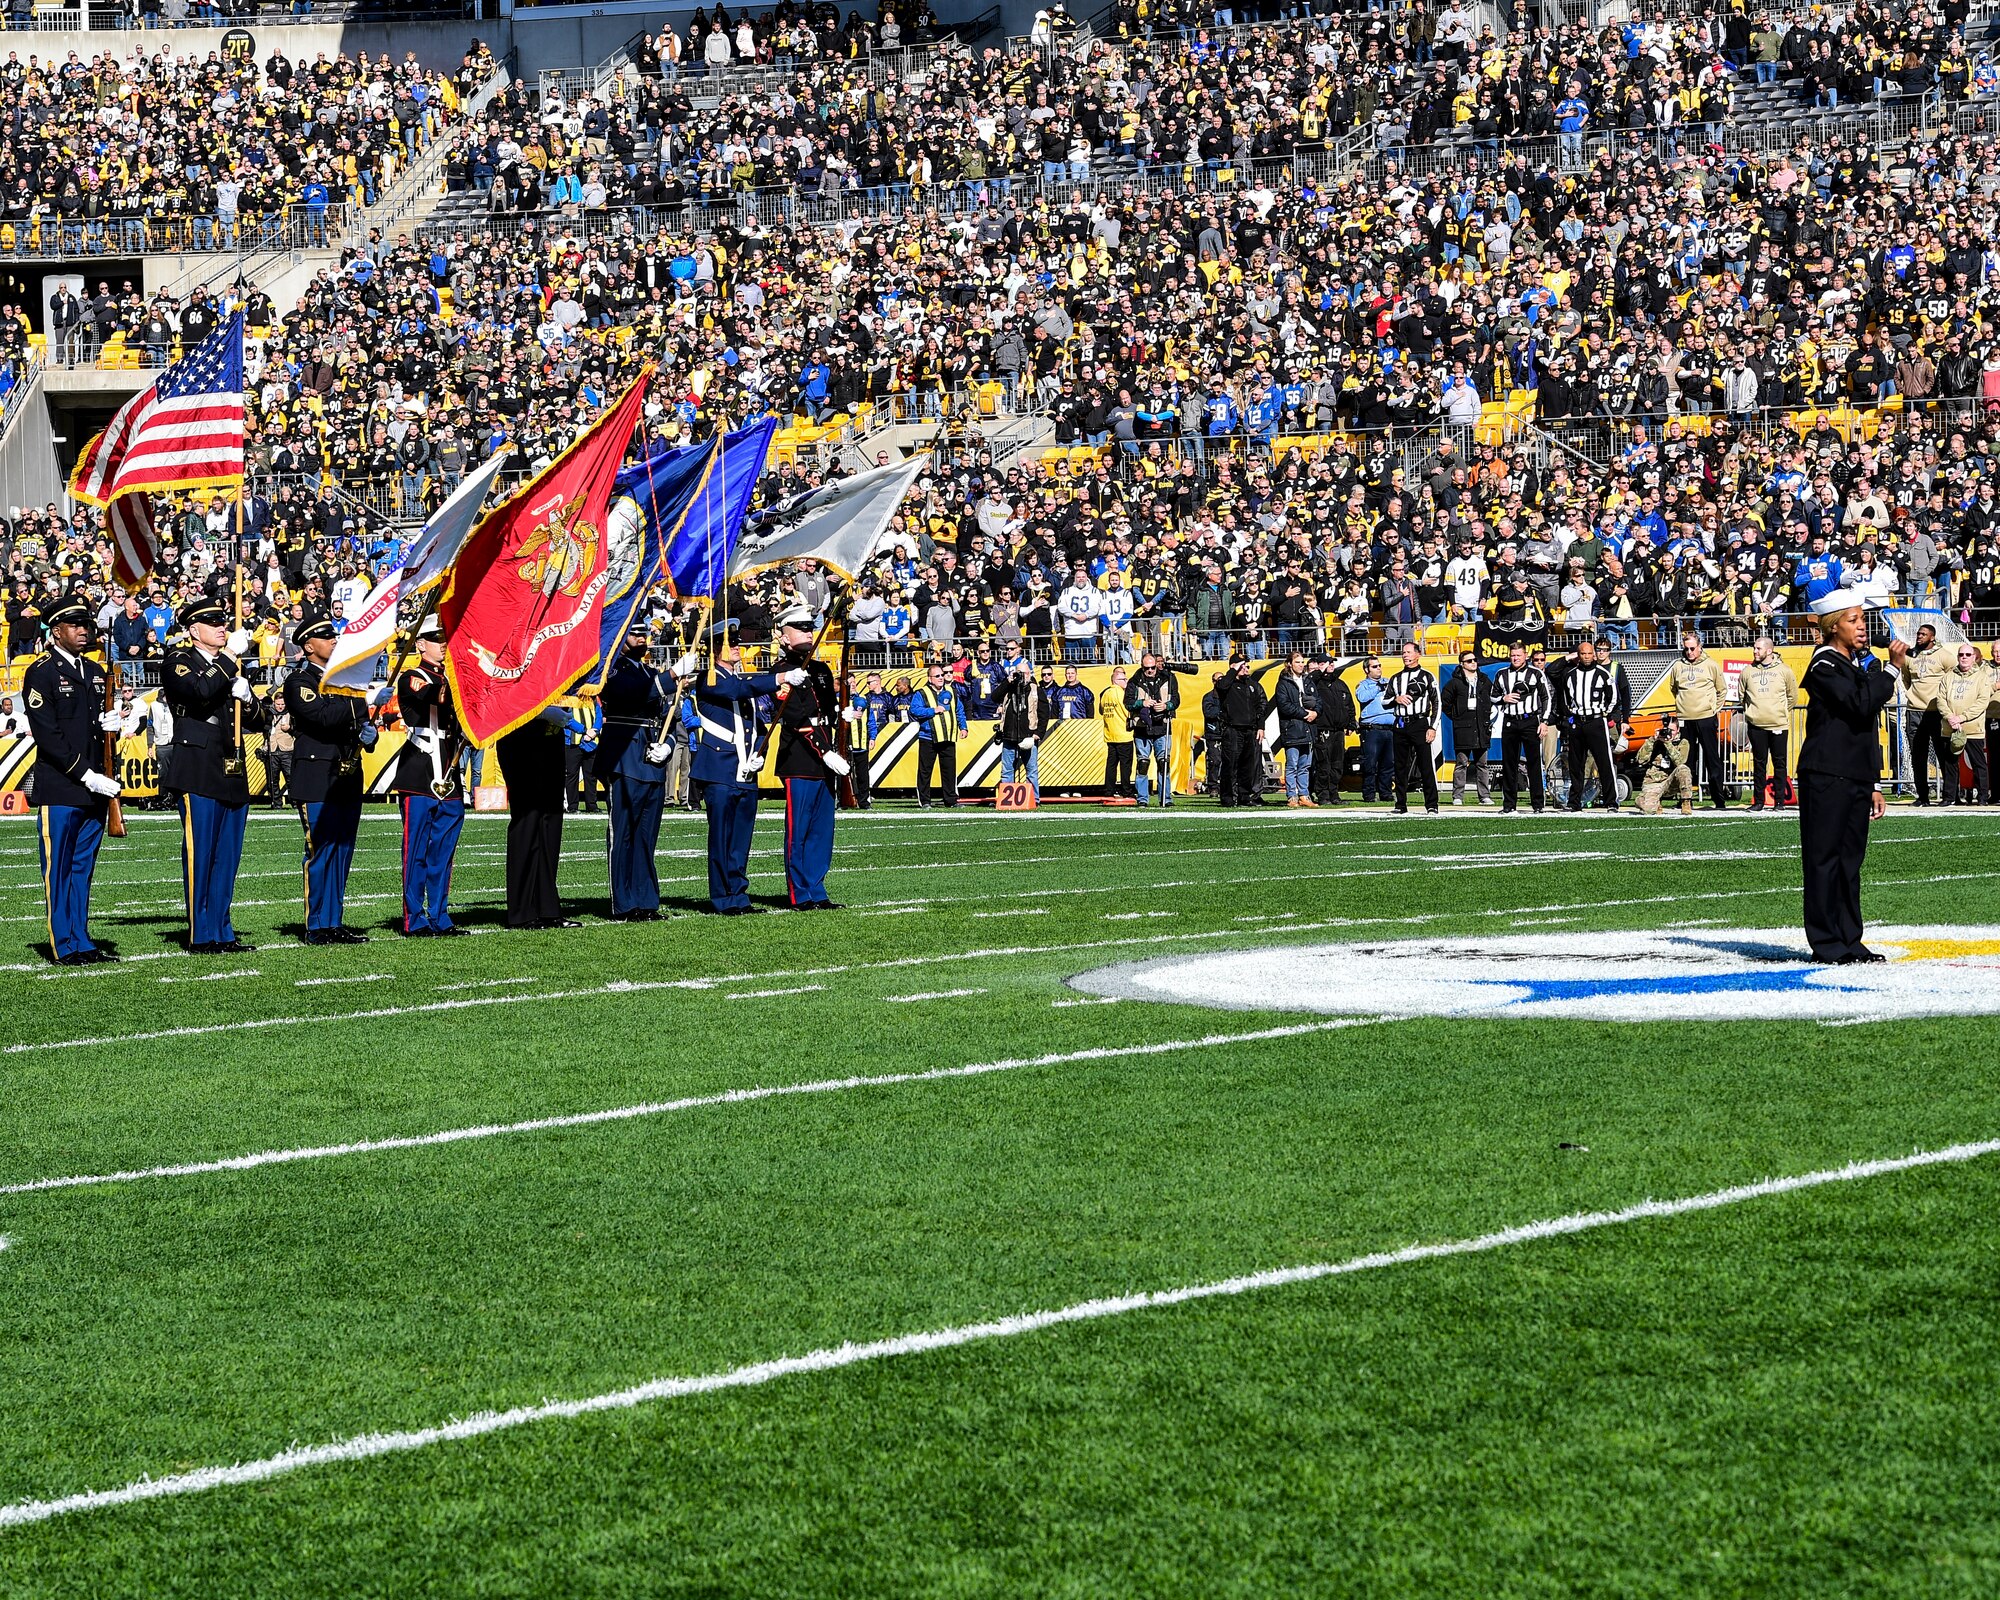 U.S. Navy Hospital Corpsman 1st Class Tanqueray Hayward performs the National Anthem with a color guard composed of members from all military branches at a Pittsburgh Steelers vs. Indianapolis Colts game at Heinz Field in Pittsburgh, Pennsylvania, November 3, 2019.